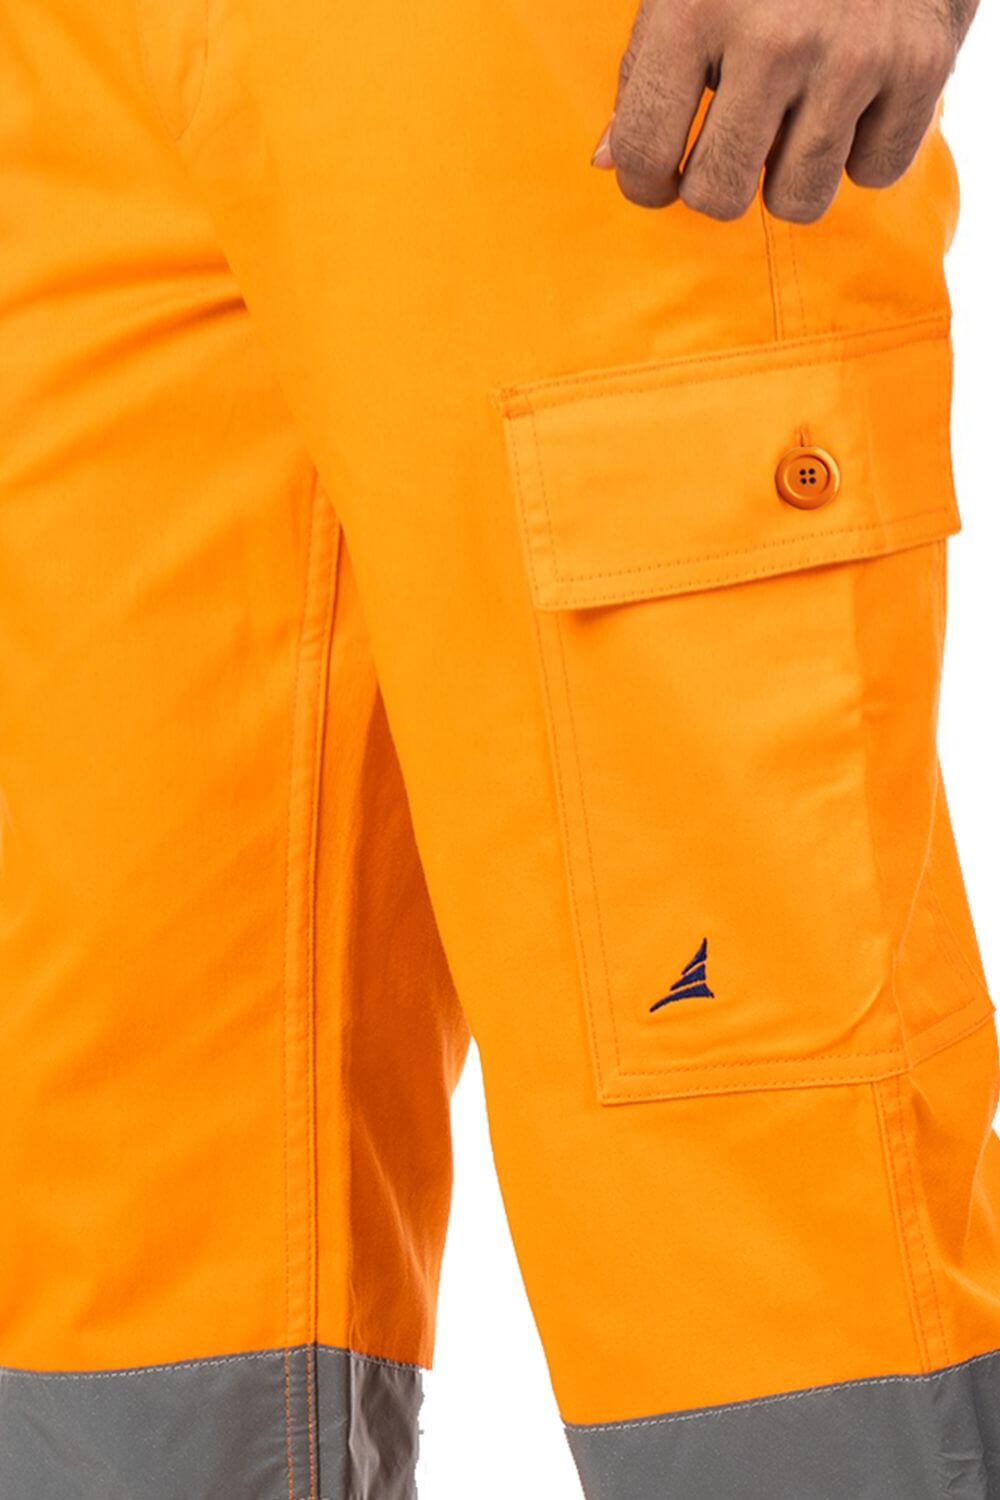 AS/NZS 4602.1:2011 standards light-weight protective Orange trouser